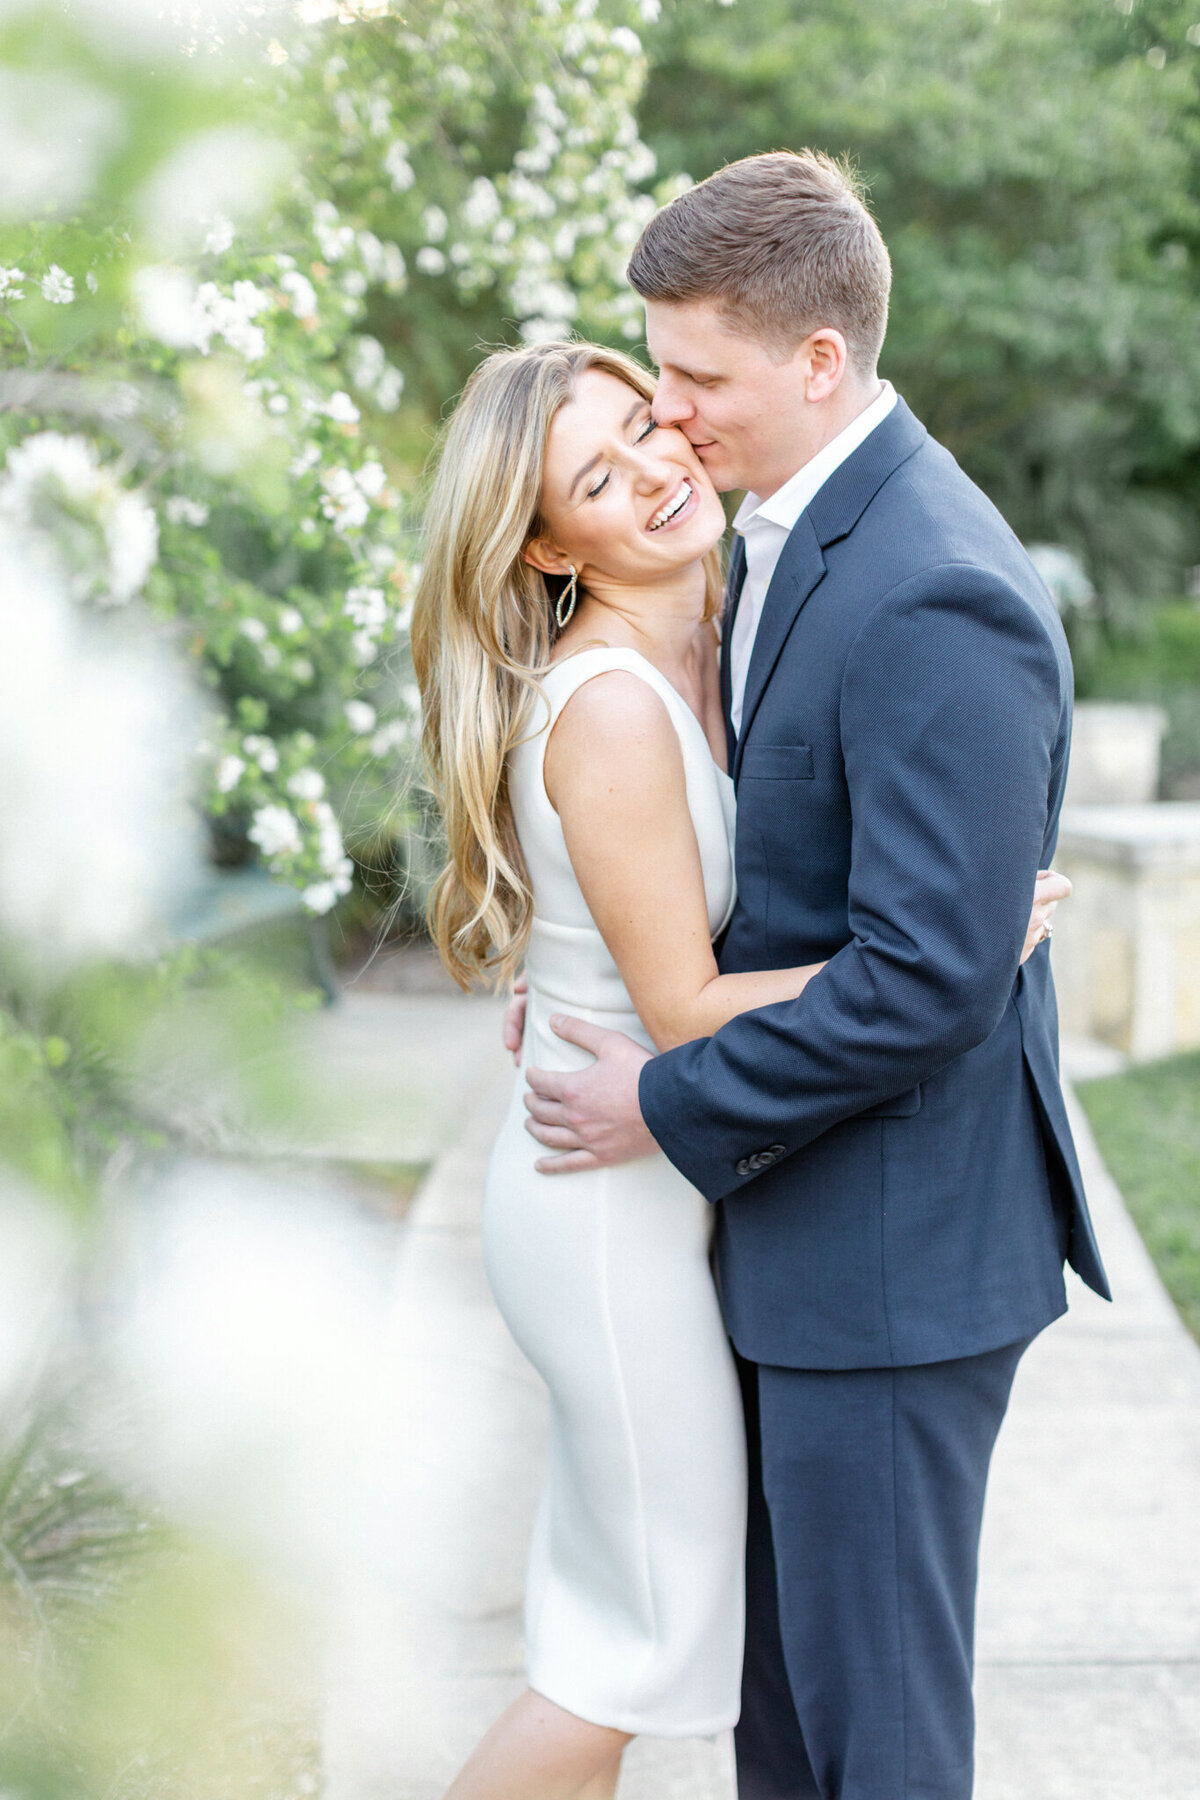 Jessica Chole Photography San Antonio Texas California Wedding Portrait Engagement Maternity Family Lifestyle Photographer Souther Cali TX CA Light Airy Bright Colorful Photography33